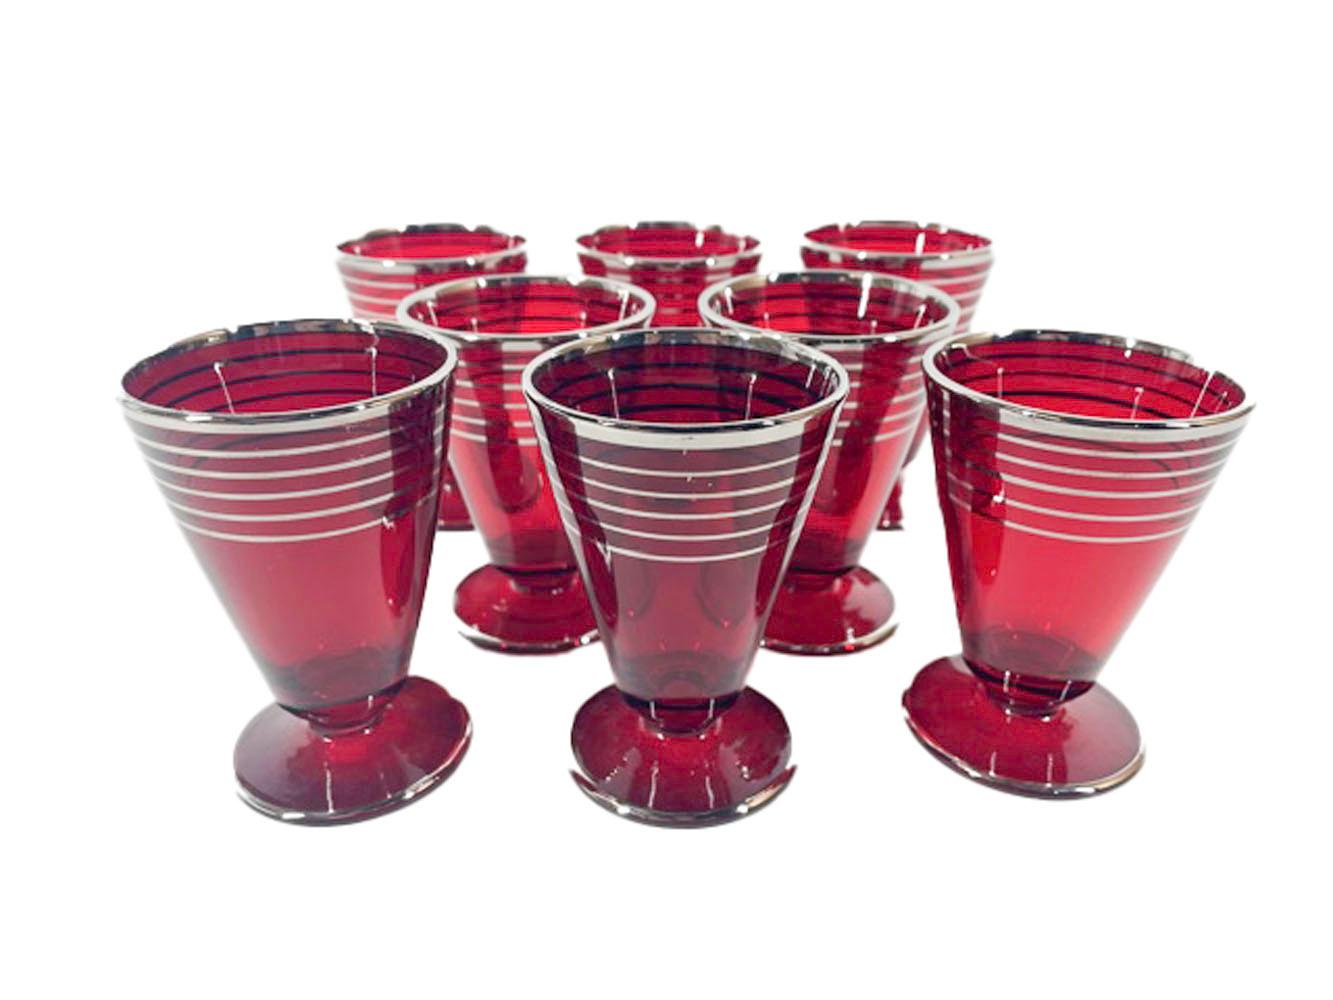 Art Deco Paden City Glass Ruby Red Cocktail Shaker Set with Silver Bands 4